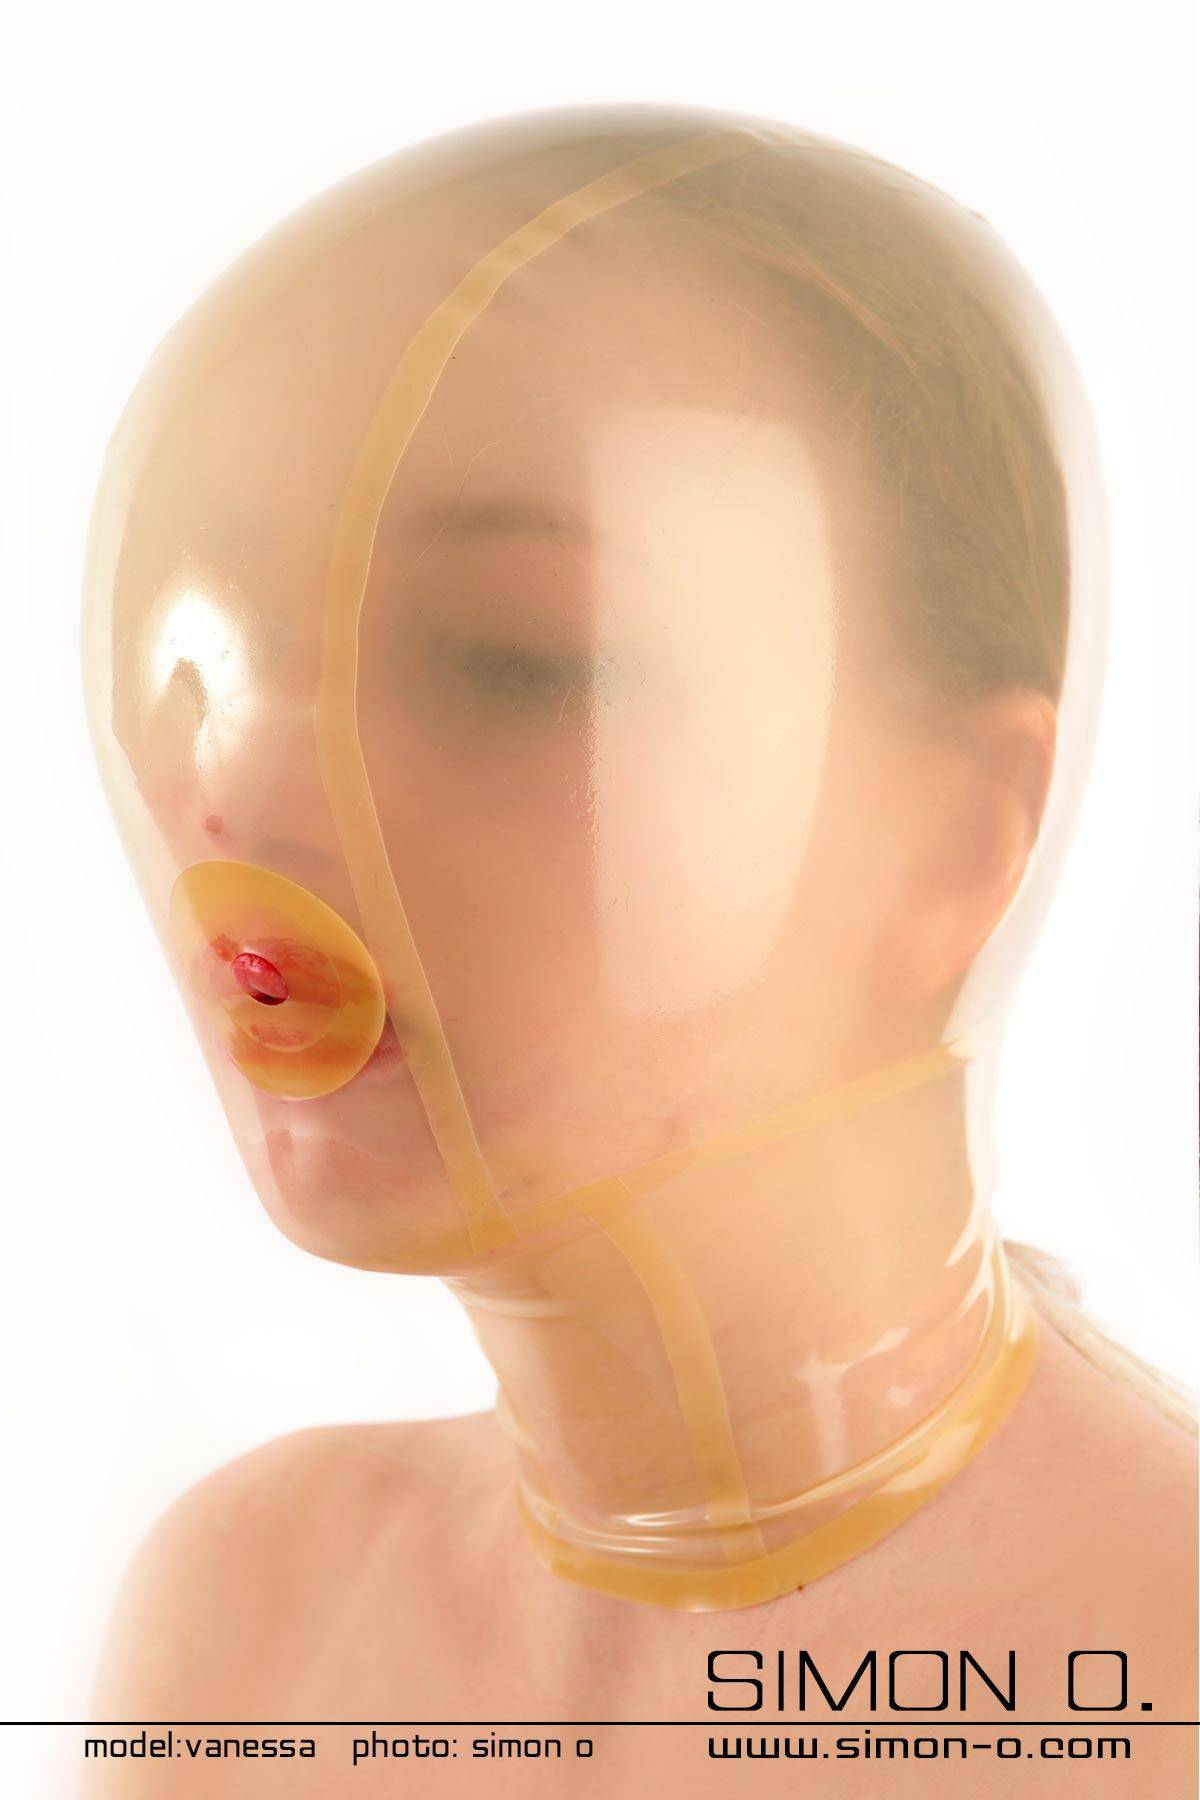 A woman wears a transparent latex hood with a small breathing hole for breathing reduction games.